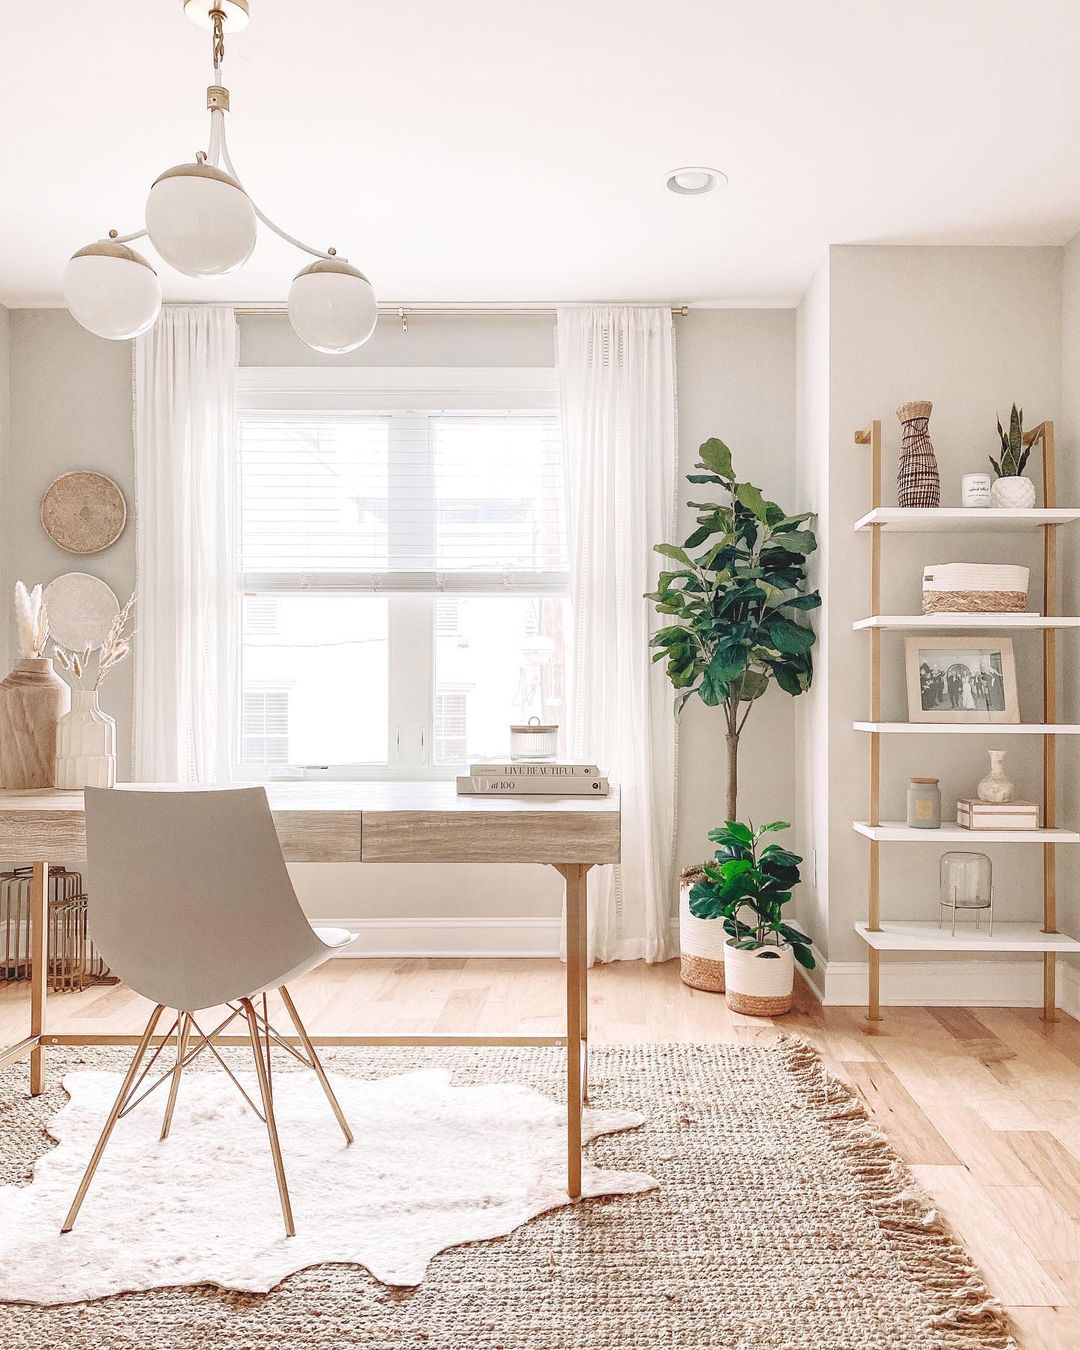 Clean Home Office Space Using Meaningful Feng Shui Decor. Photo by Instagram user @bymeghang